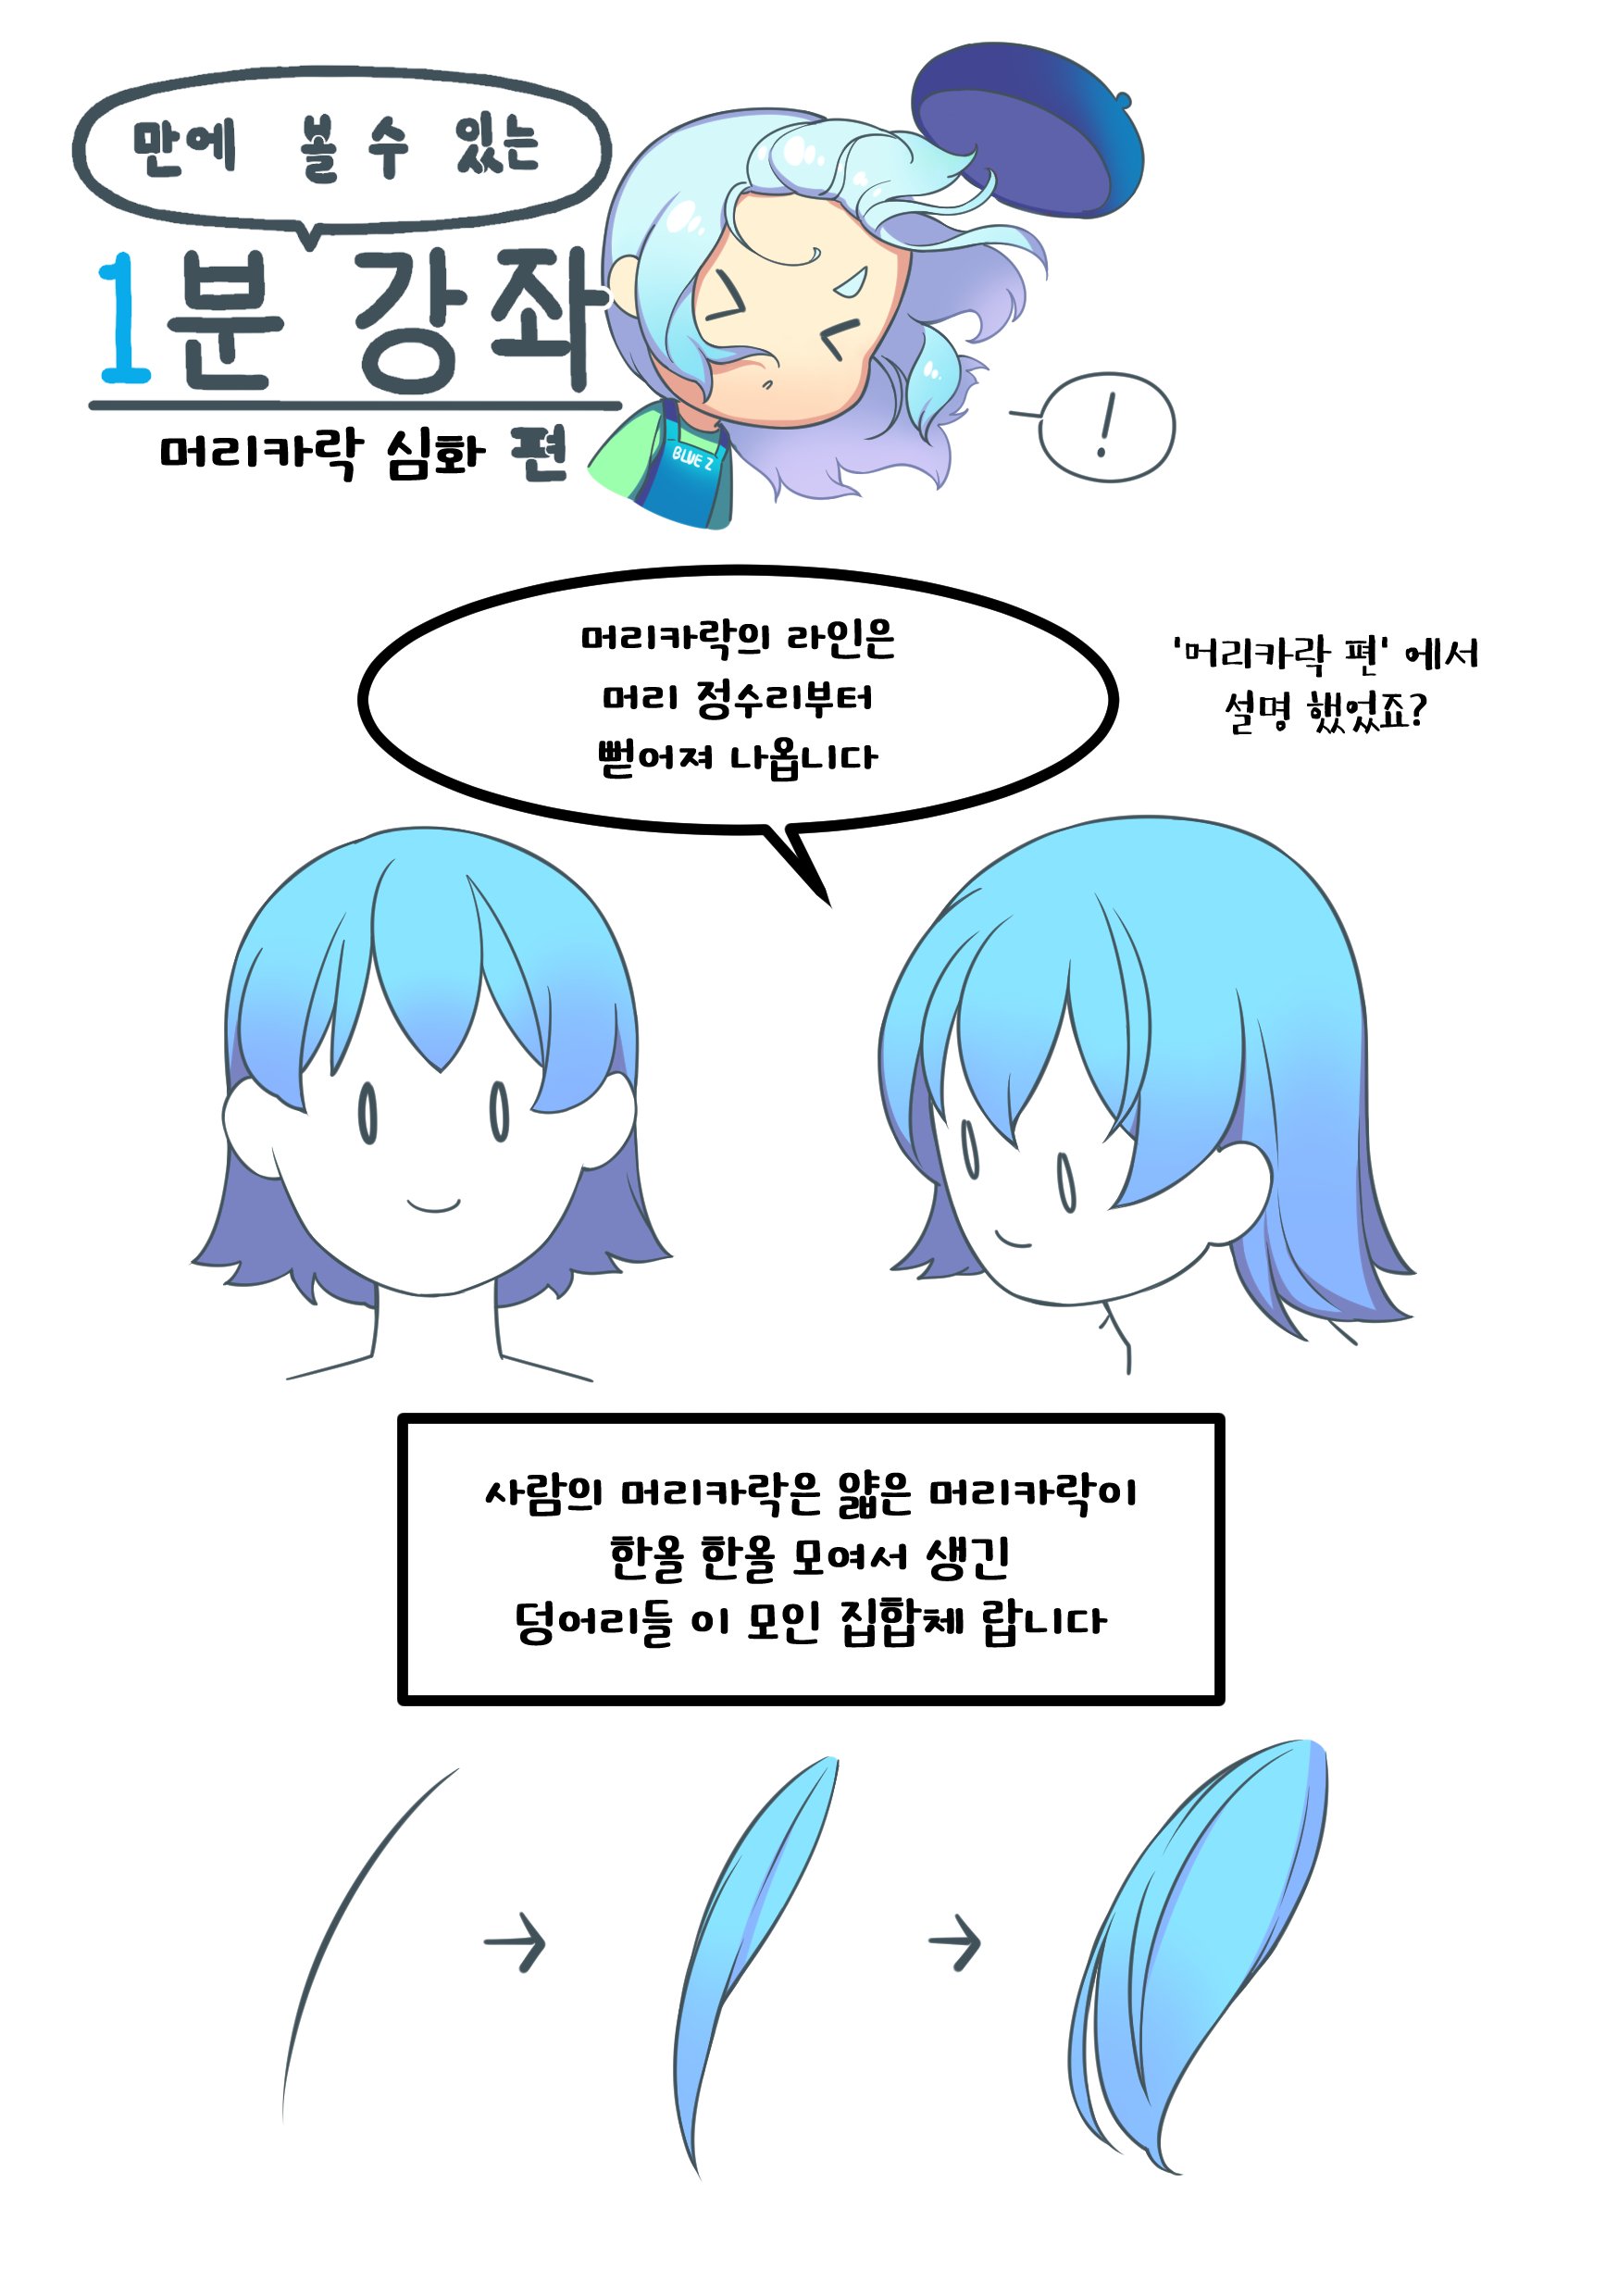 Yuii Chan Draws - HAIR REFERENCE! ✨, by @bluez3619995